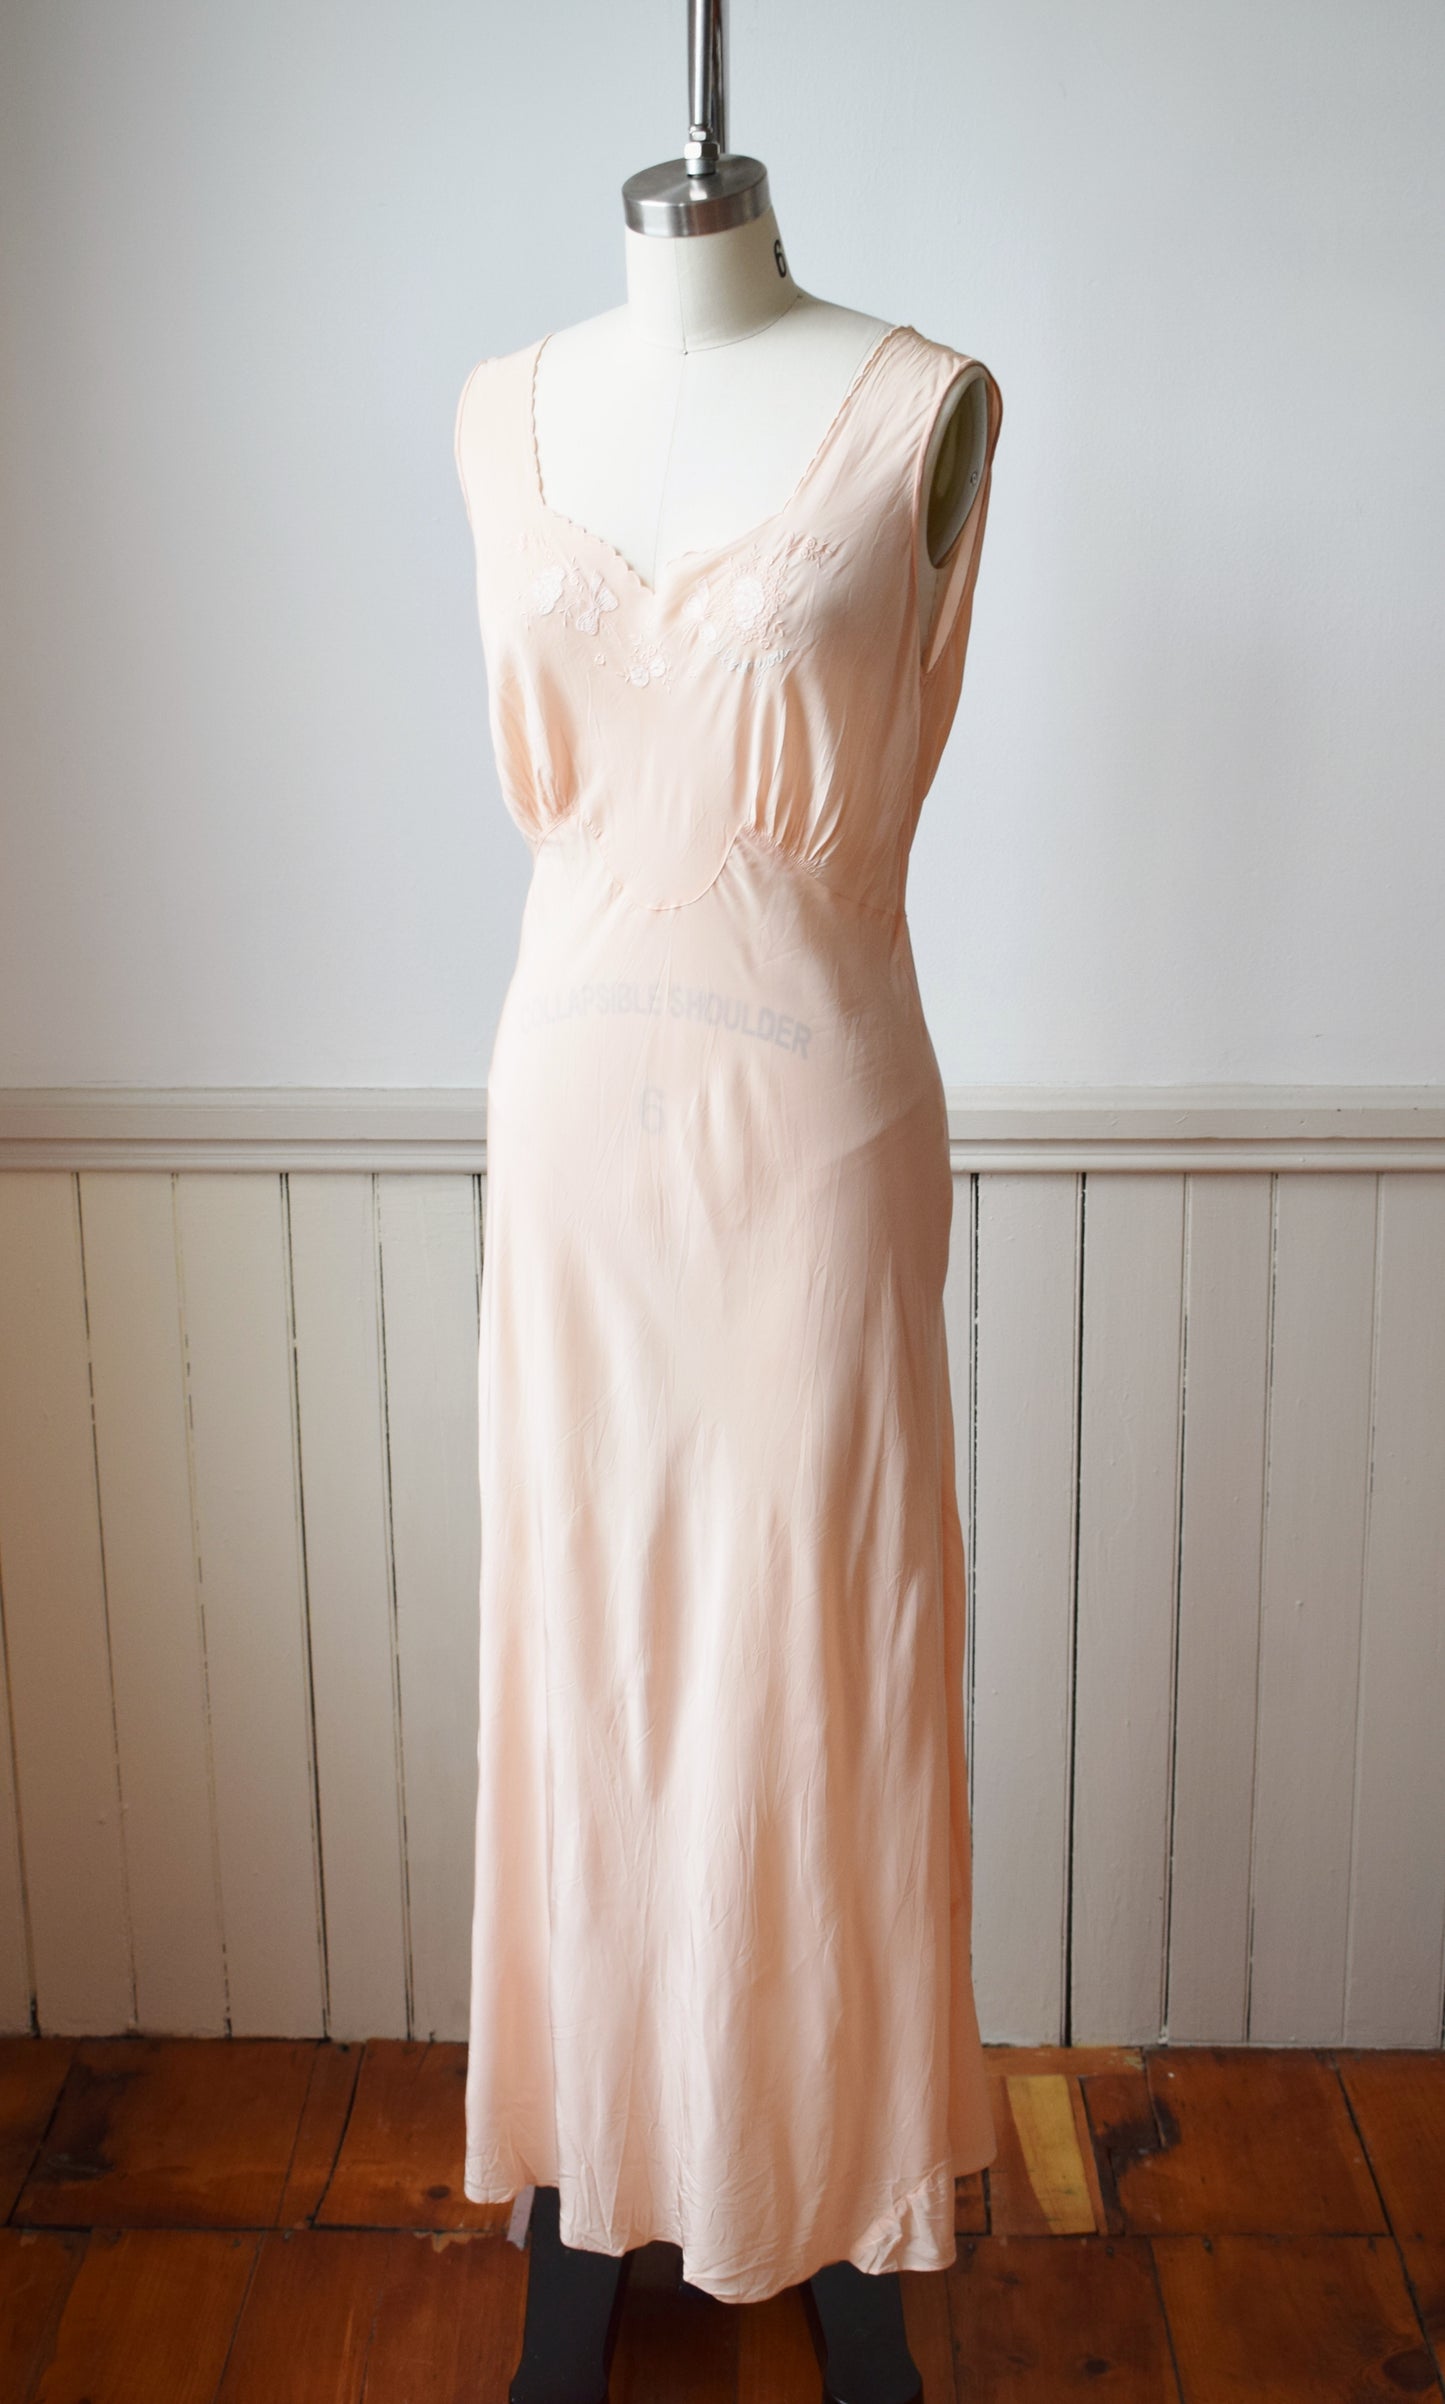 1940s "I Love You" Nightgown Dress | S/M